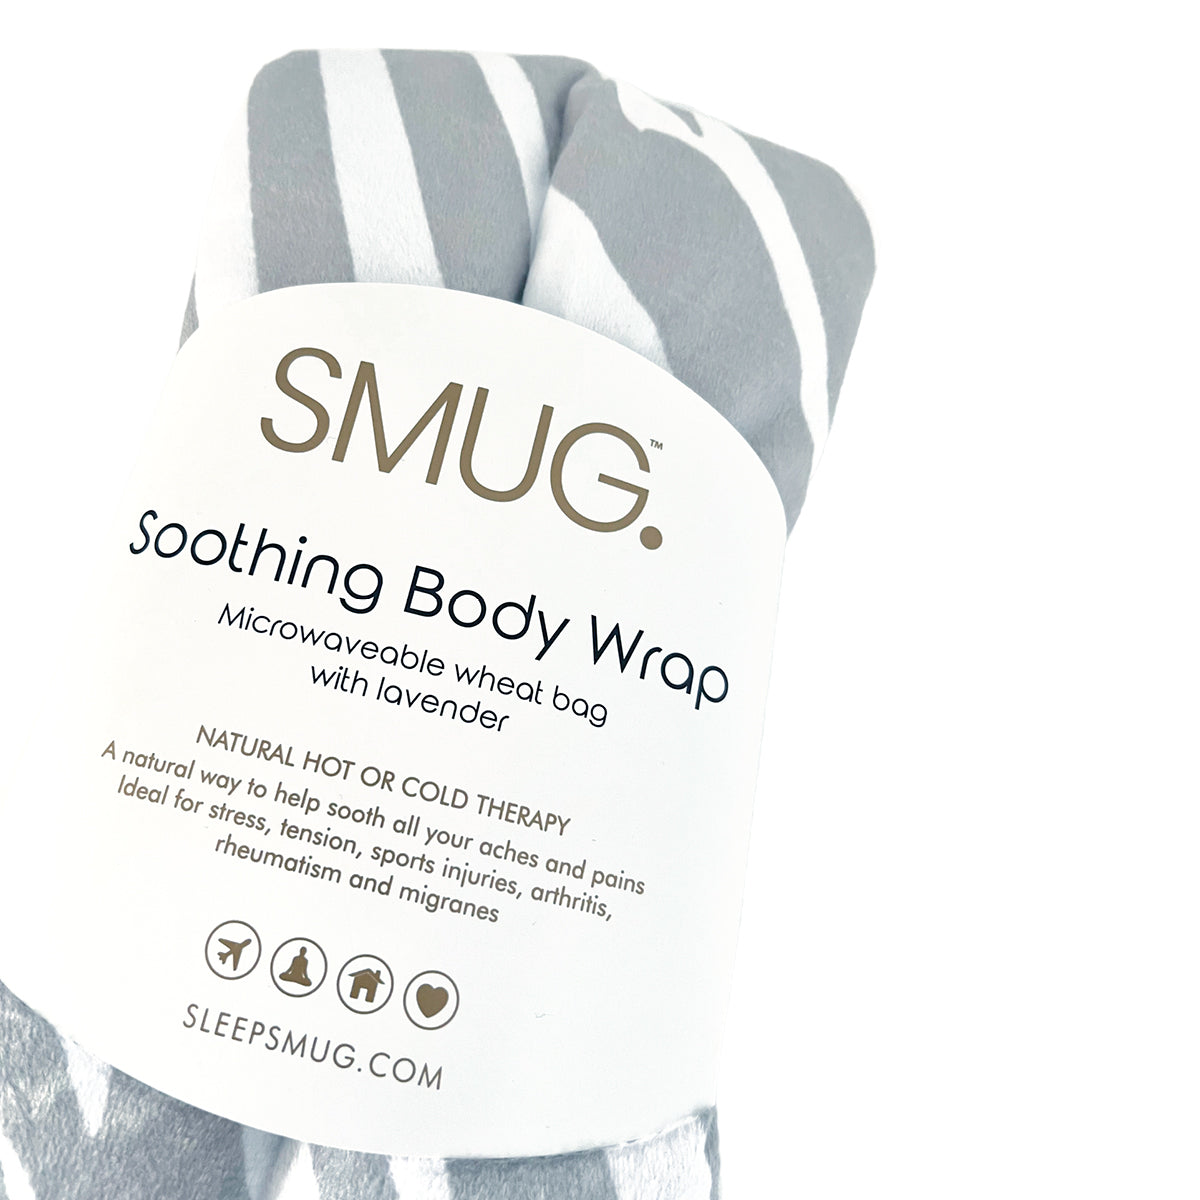 Soothing Body Wrap Wheat Bag Infused with Lavender Oil - Zebra Print